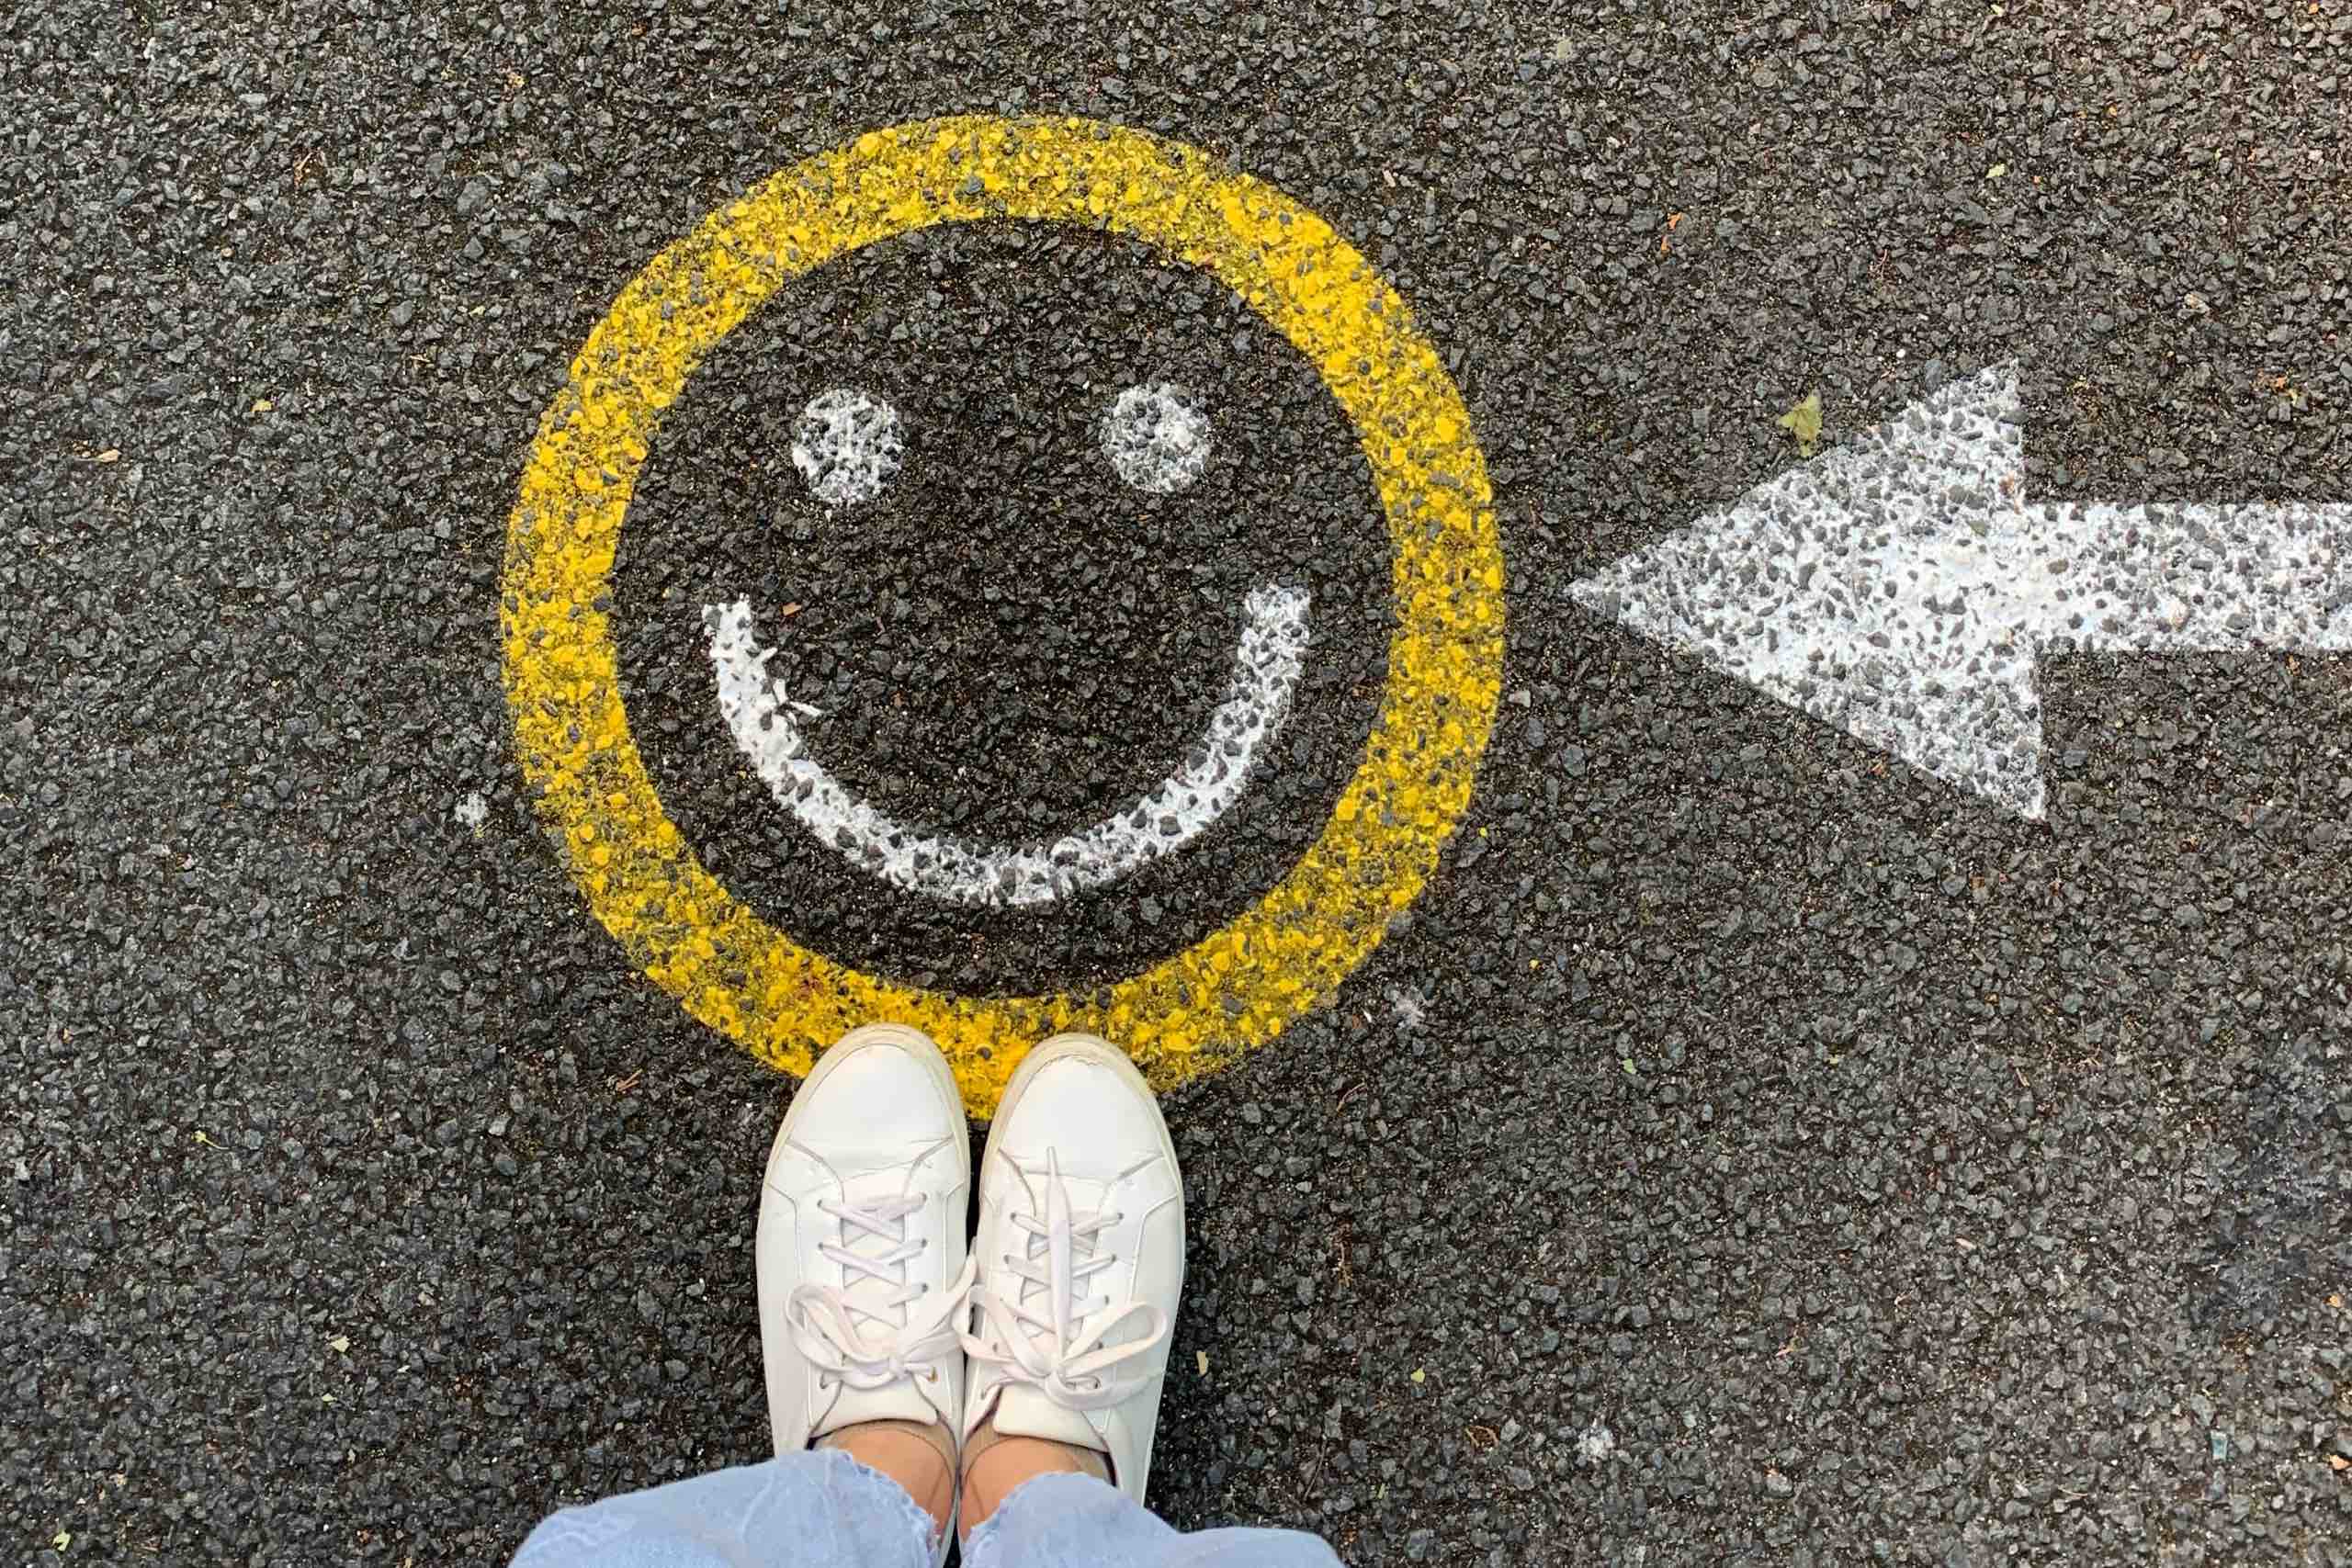 smiley face painted on pavement